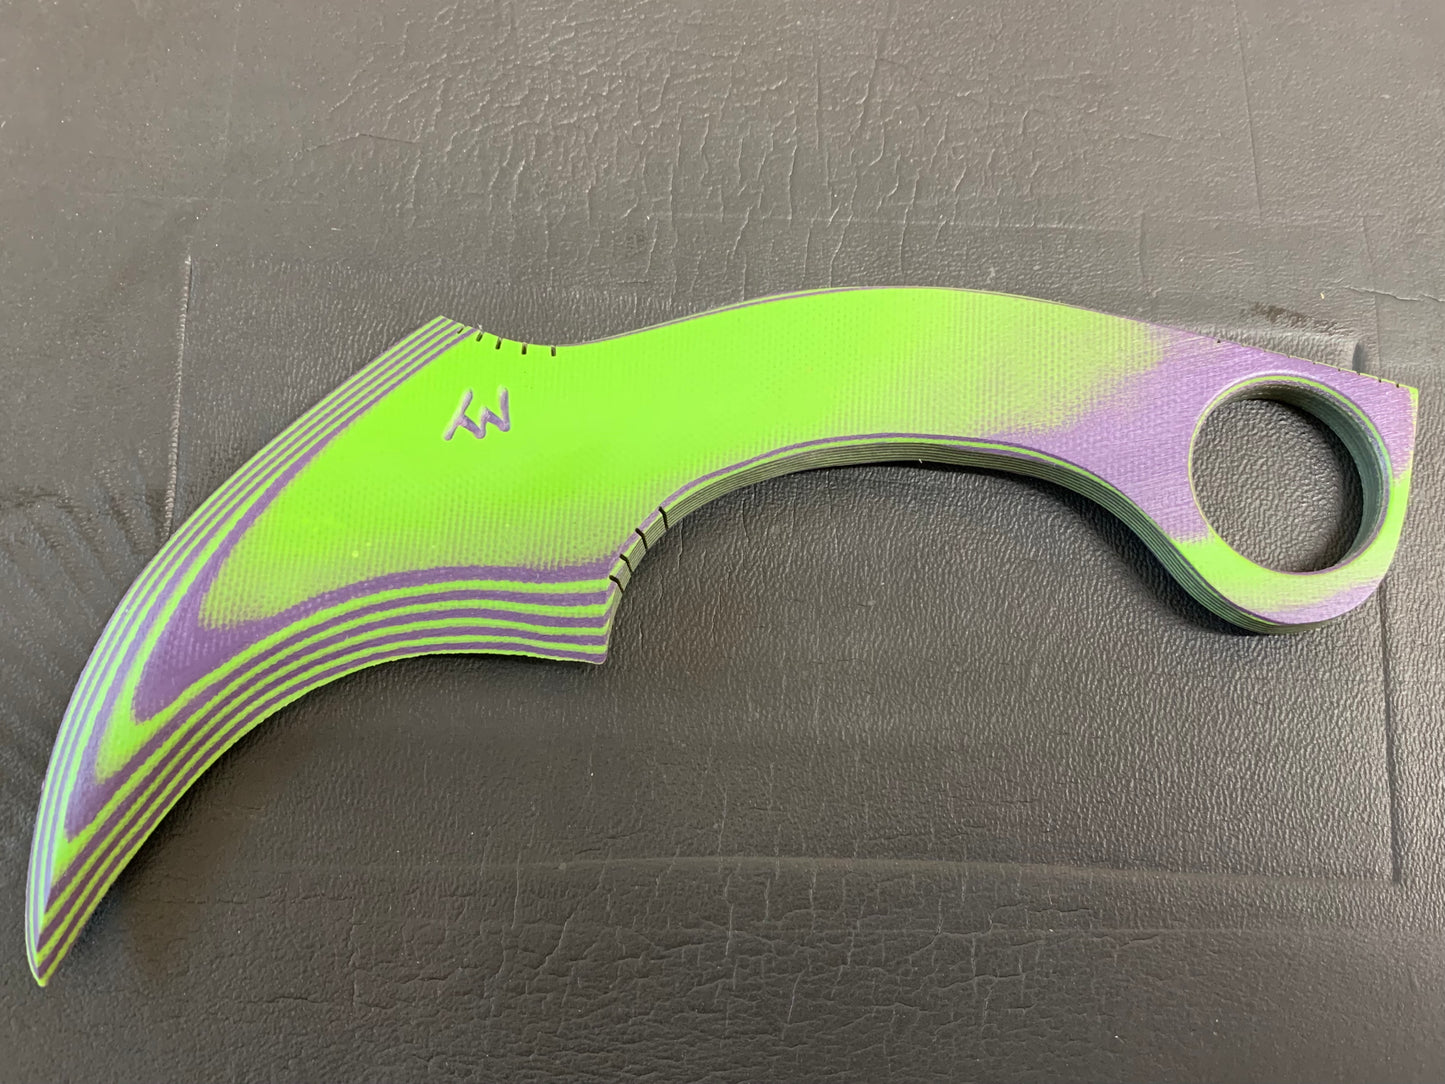 Non-Metallic Conceal Carry Knife - Makoy - Karambit Style